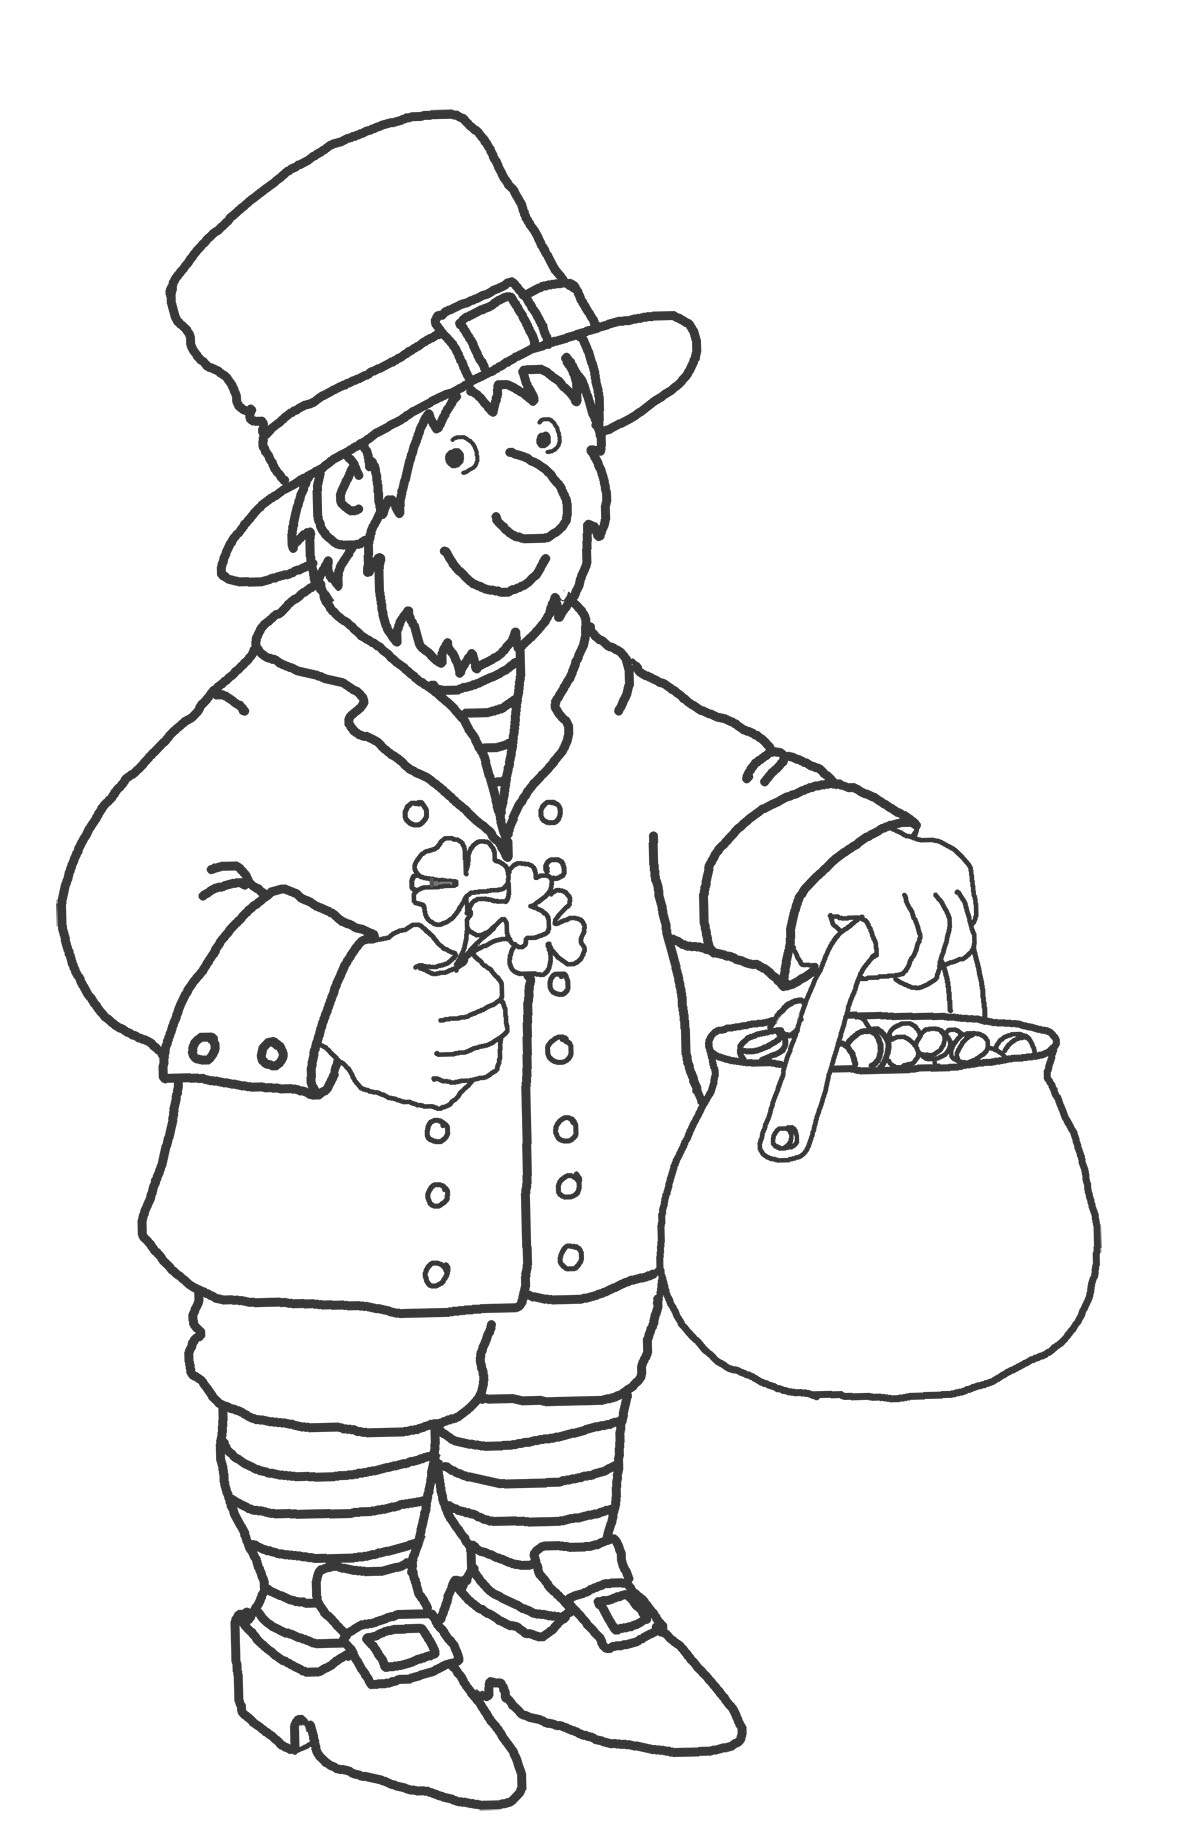 coloring page with leprechaun for st. Patrick's day